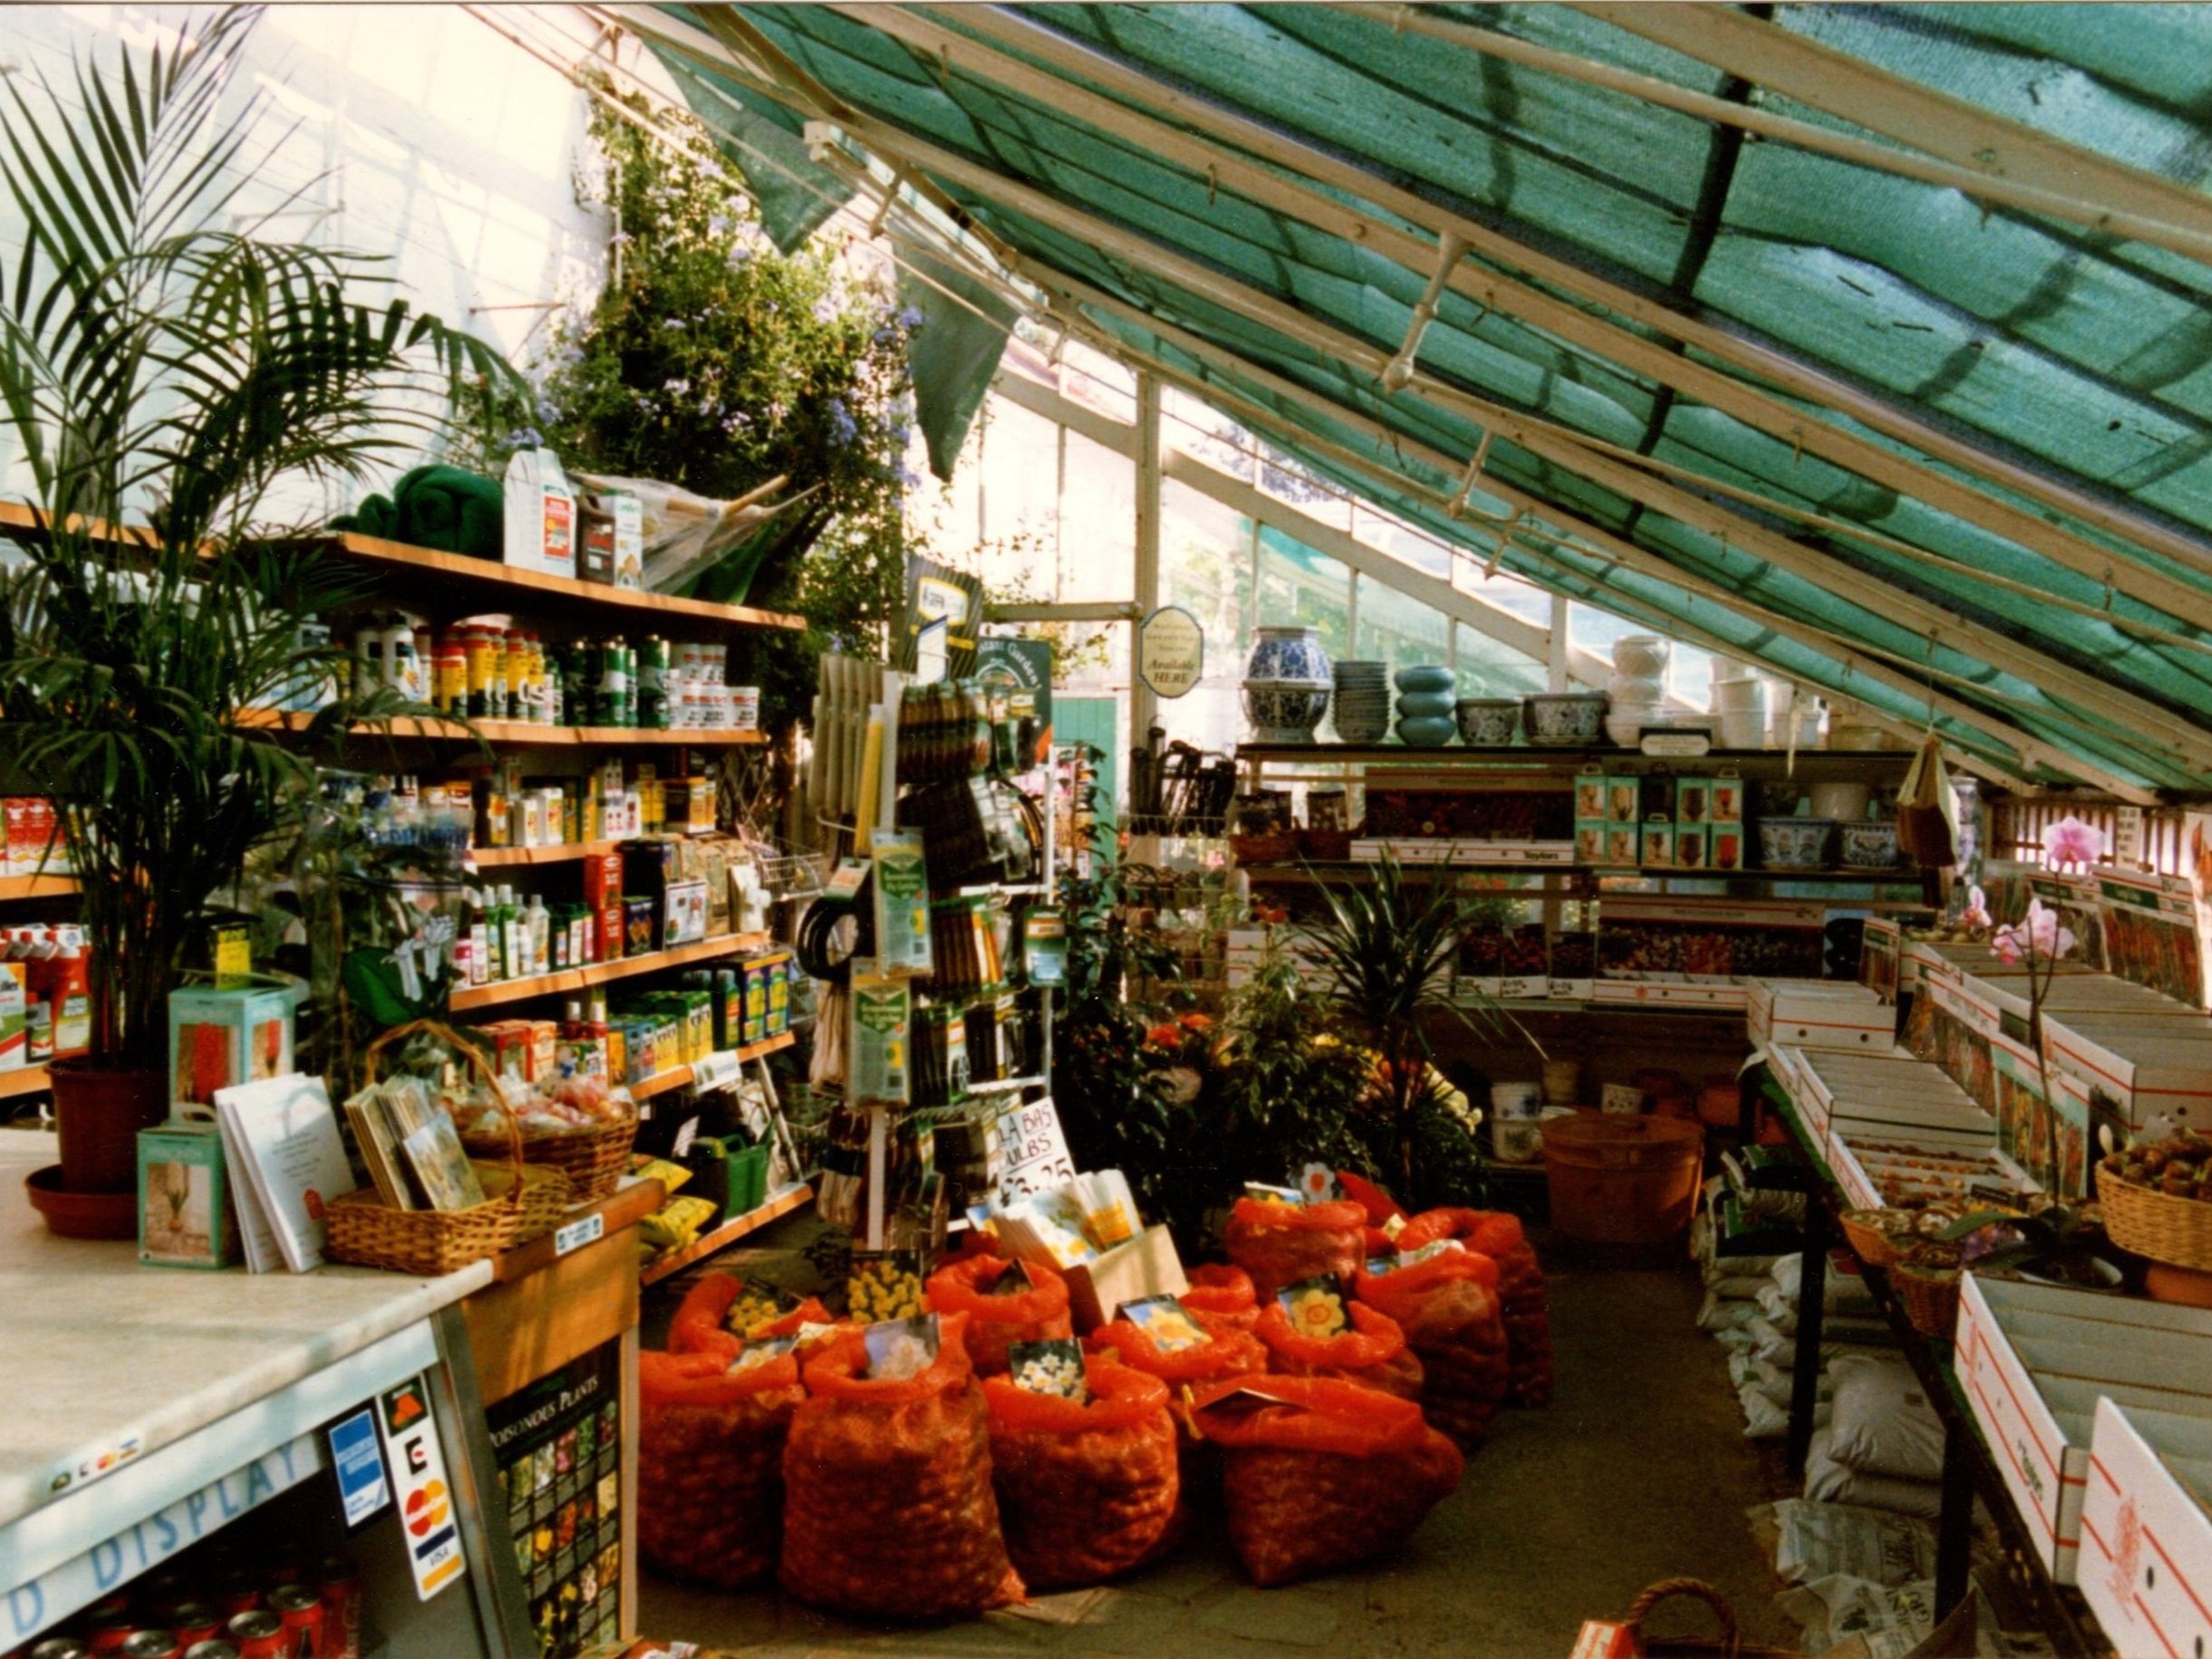 Inside the old shop within the Victorian glasshouse